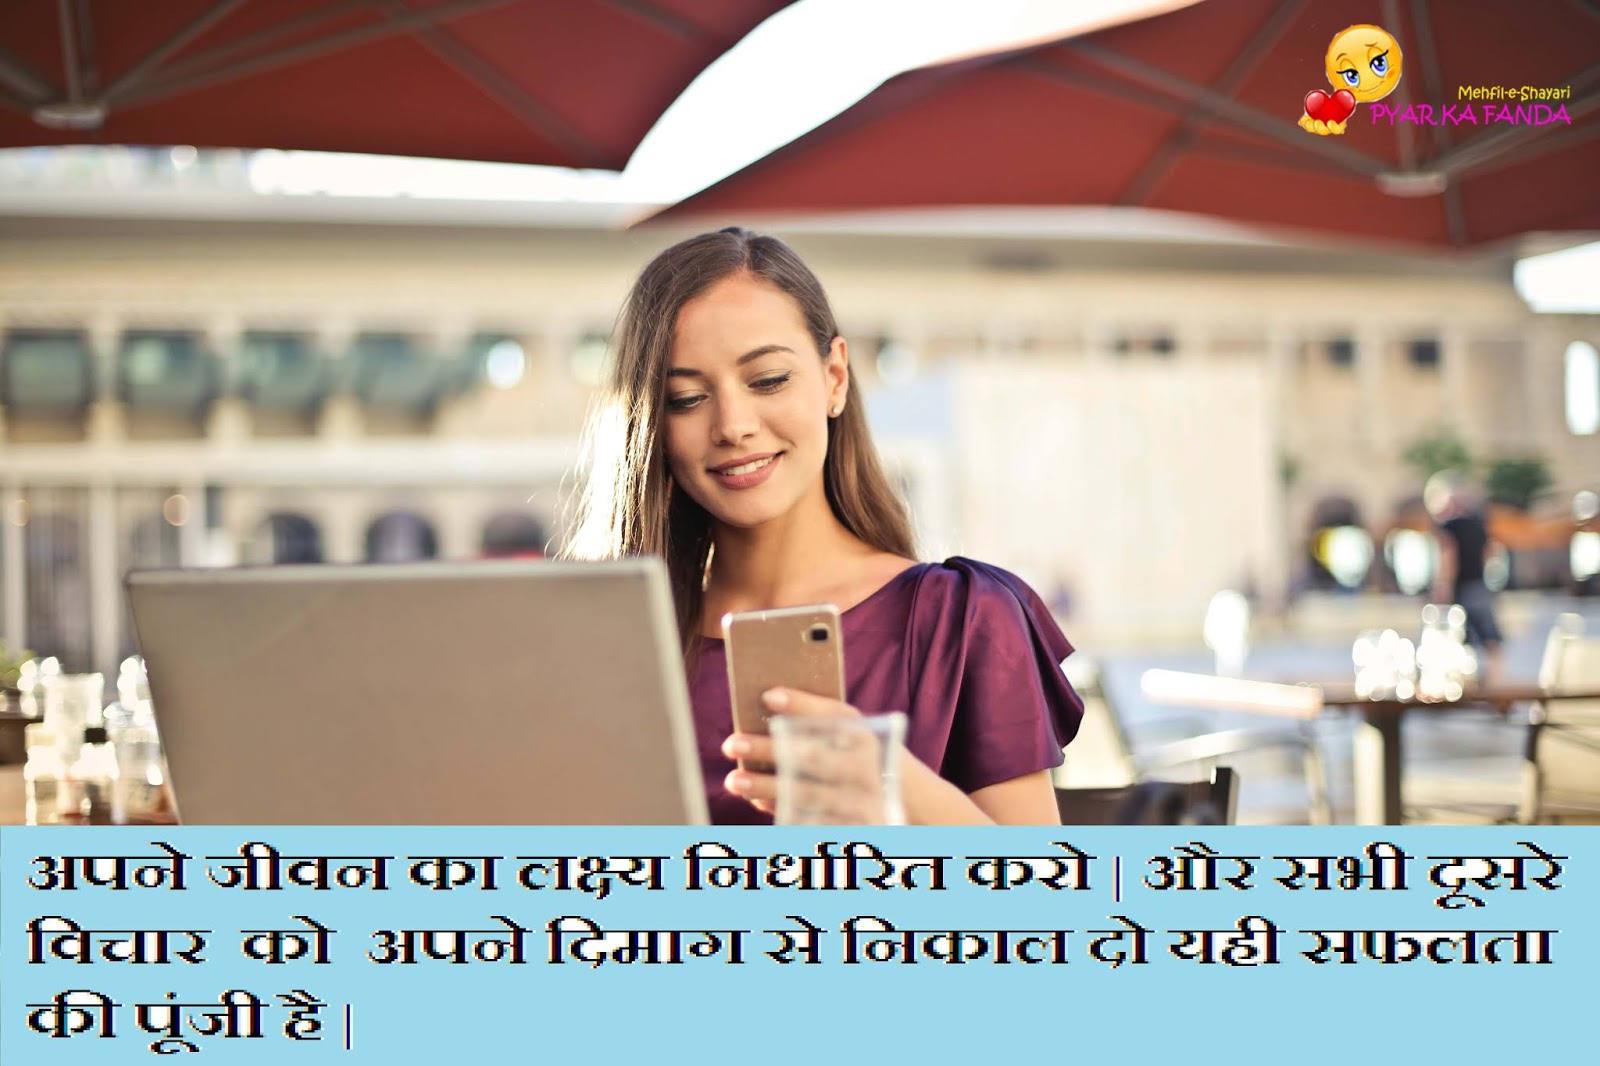 Motivation Quotes In Hindi Student Motivation Quotes In Hindi